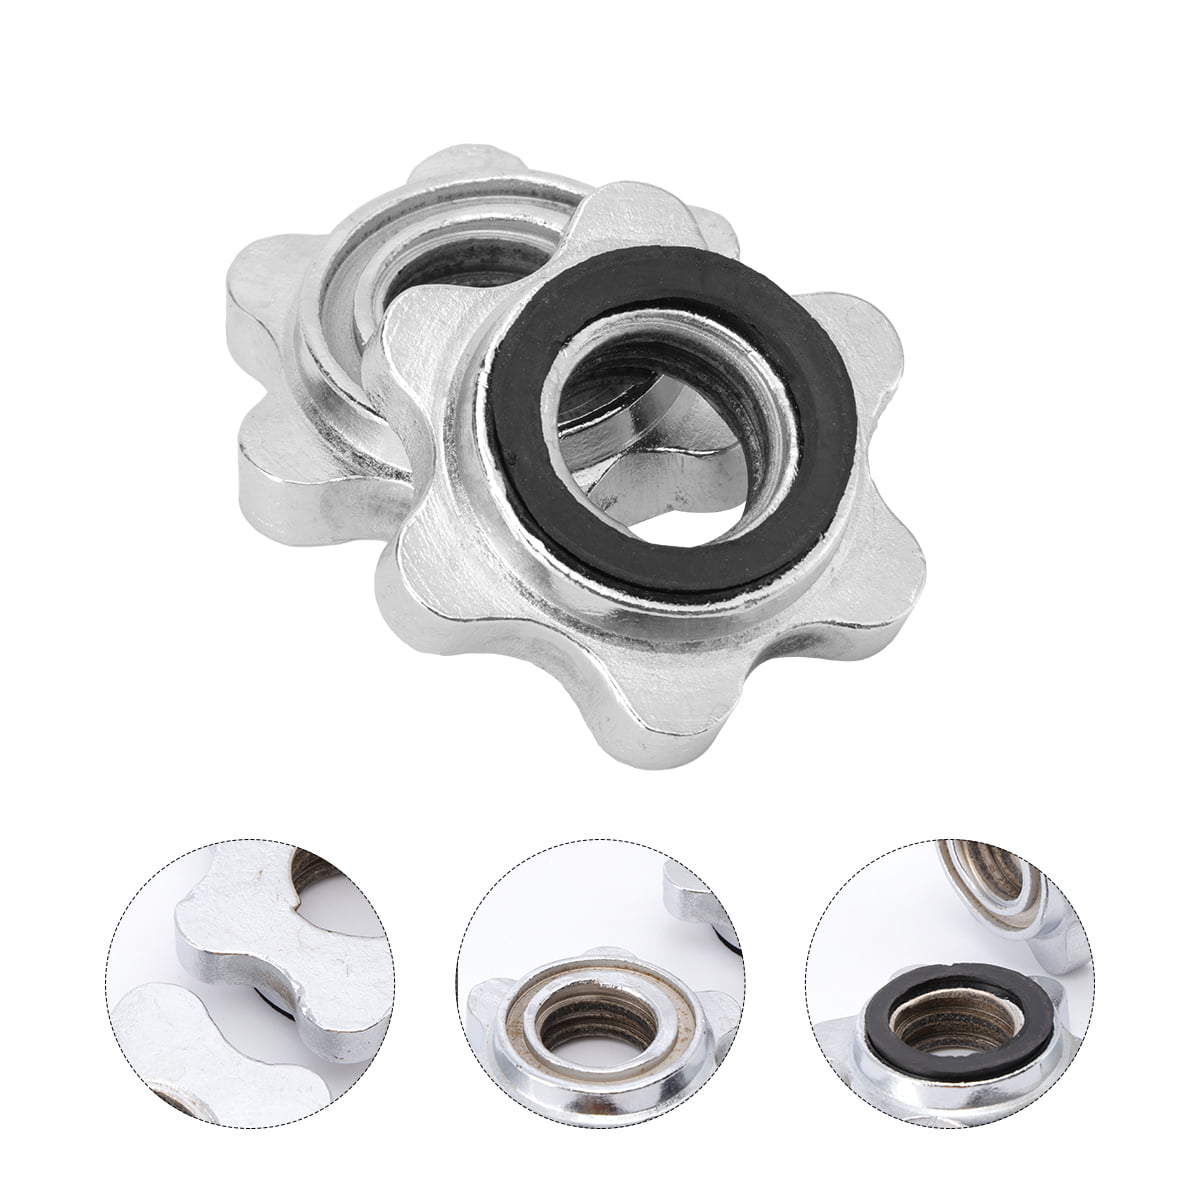 2Pcs 2.5cm Iron Hex Nut Spin-Lock Collar Screw Replacement for Barbell Dumbell 